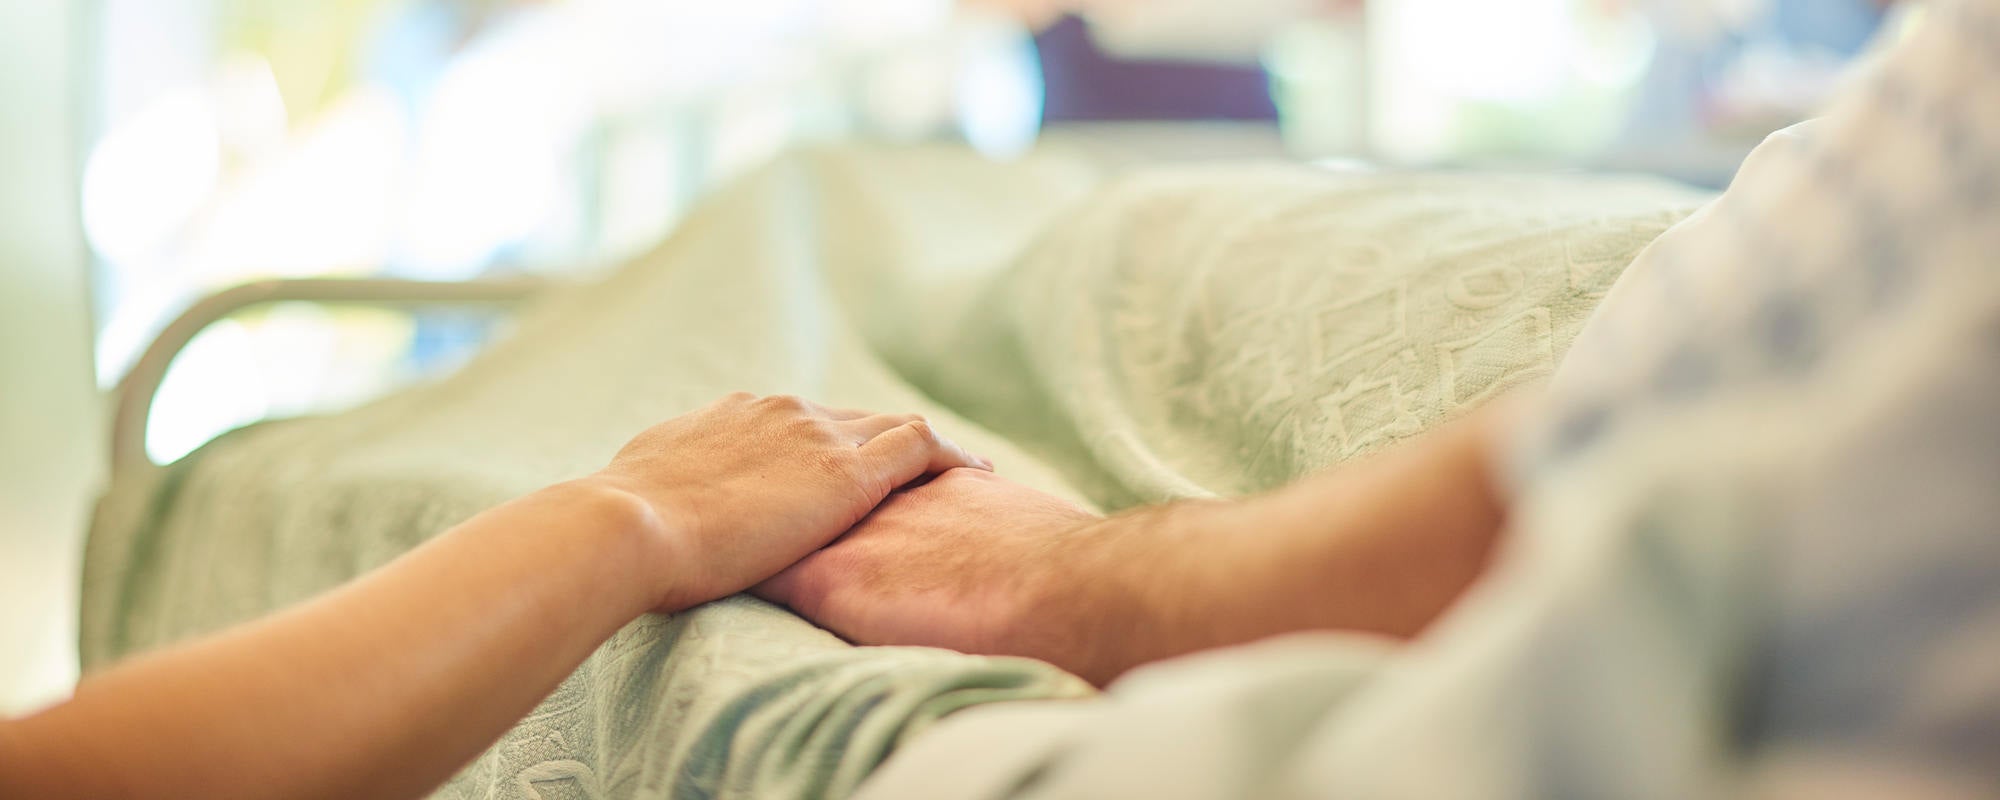 Person holding hands with someone in a hospital bed